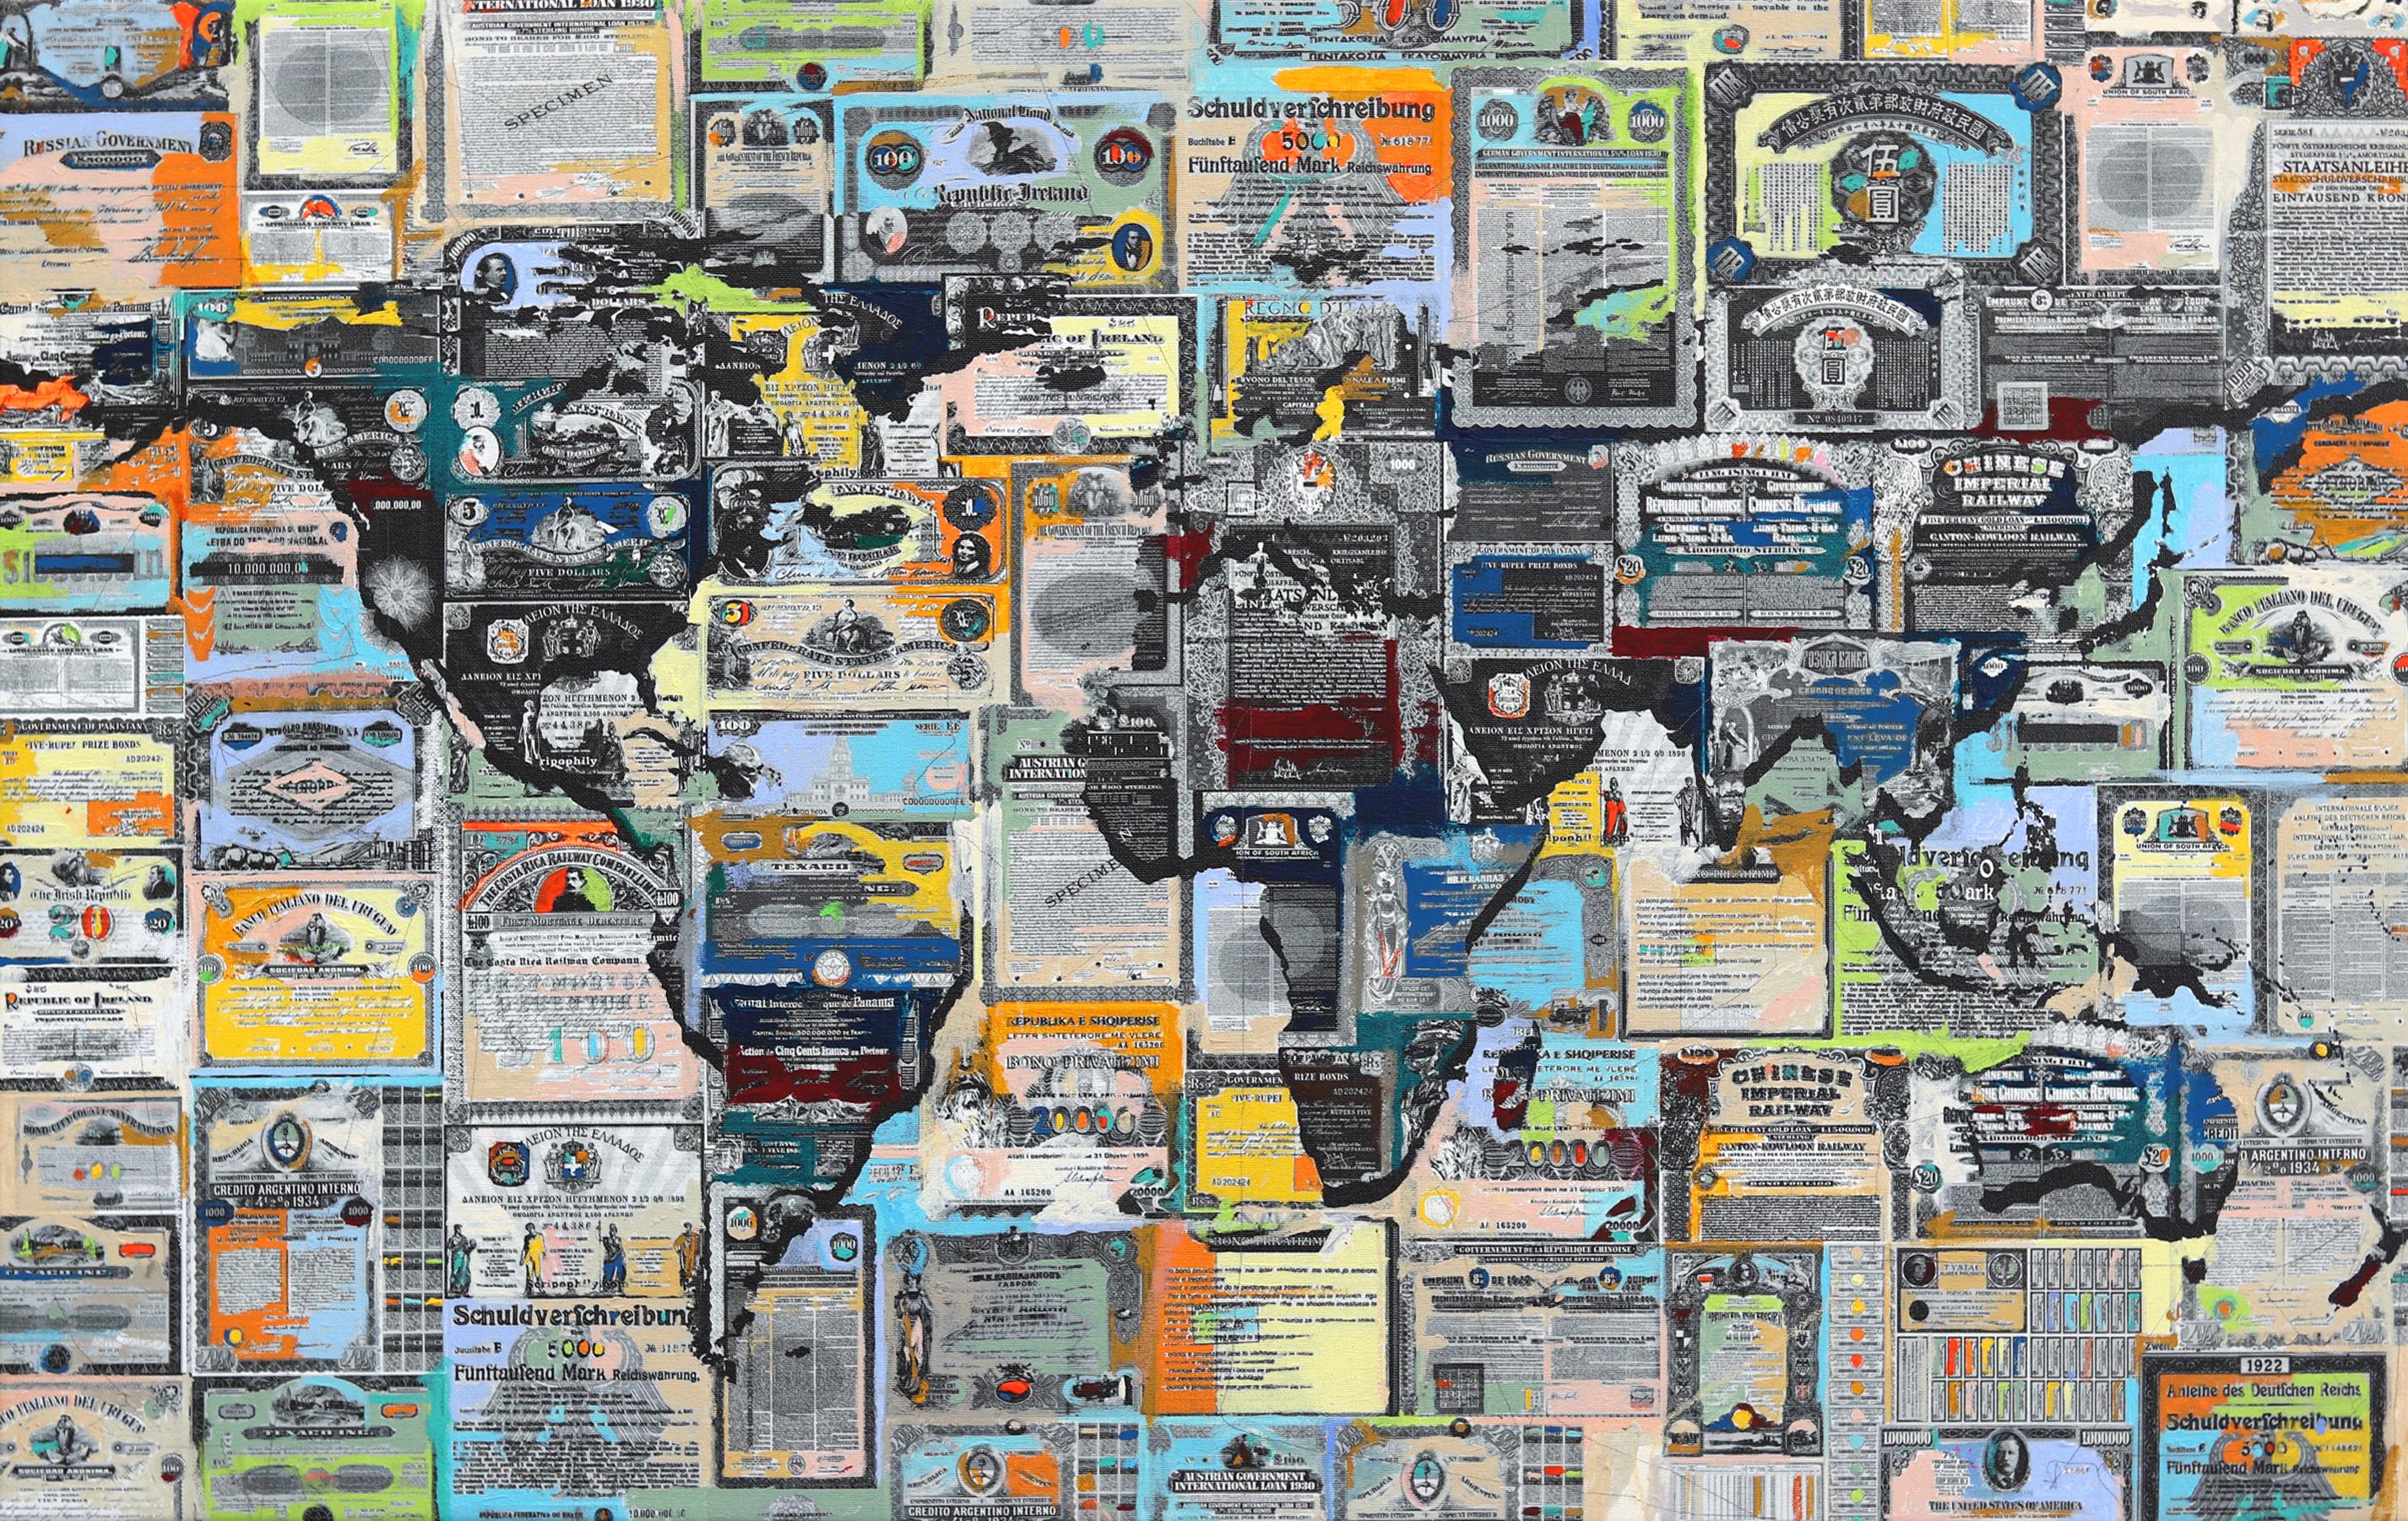 Geobond - Colorful Authentic Urban Map Currency Painting - Mixed Media Art by Fabio Coruzzi